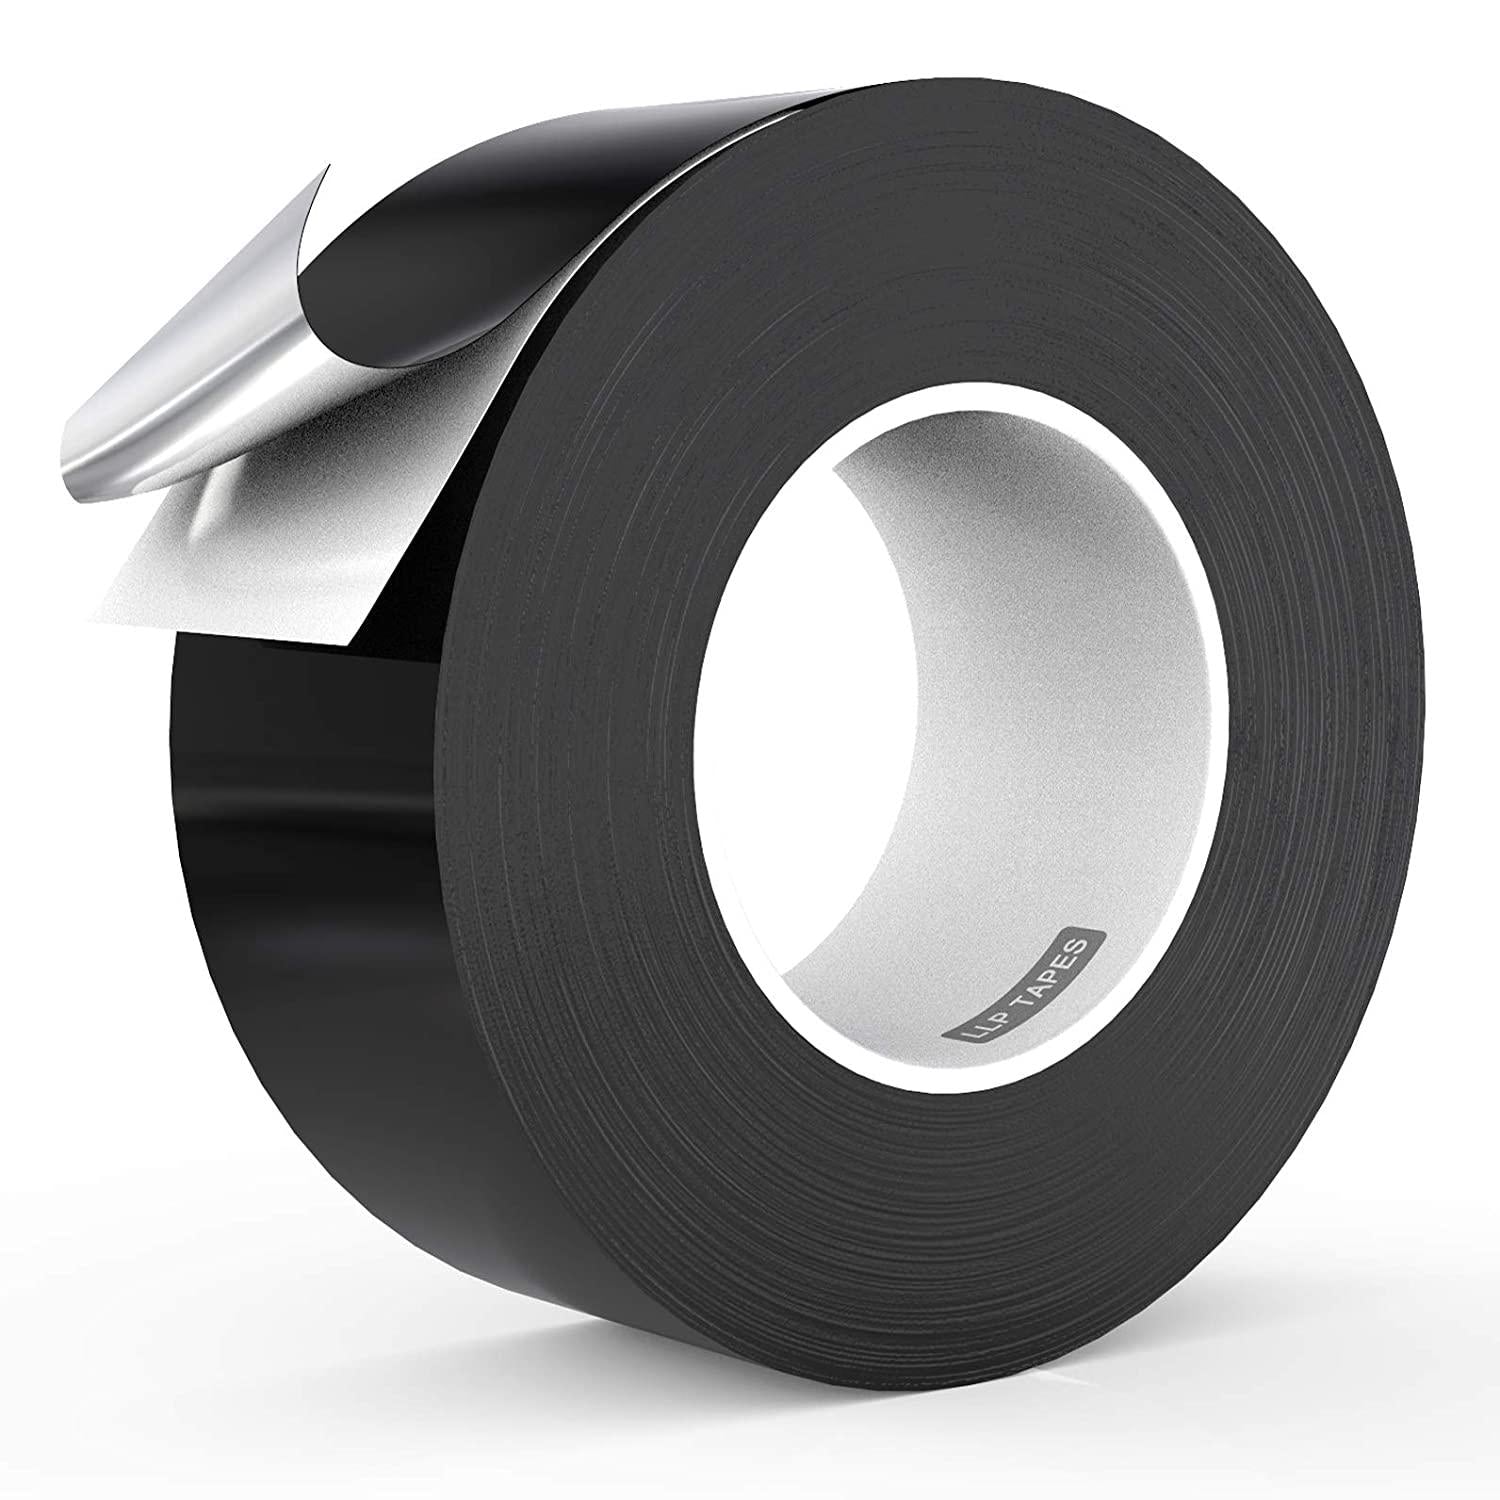 LLPT, LLPT Aluminum Black Foil Tape 2 Inches x 55 Yards 3.94 Mil High Temp Heavy Duty Adhesive HVAC Sealing Hot Cold Air Duct Tape for Pipe Metal Repair (BF255)